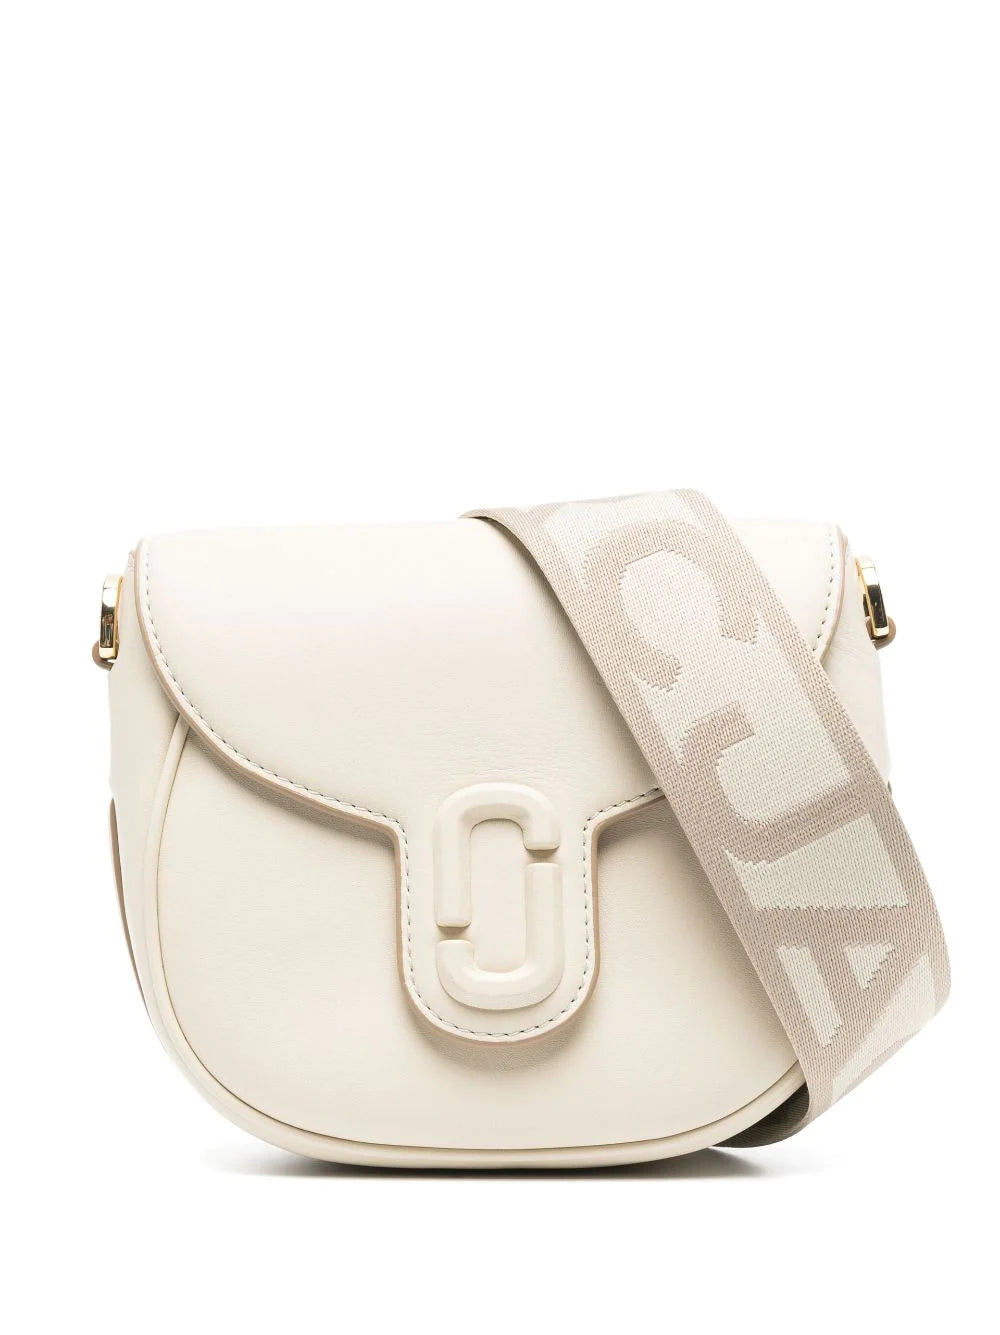 The J Marc Small Leather Saddle Bag in White - Marc Jacobs